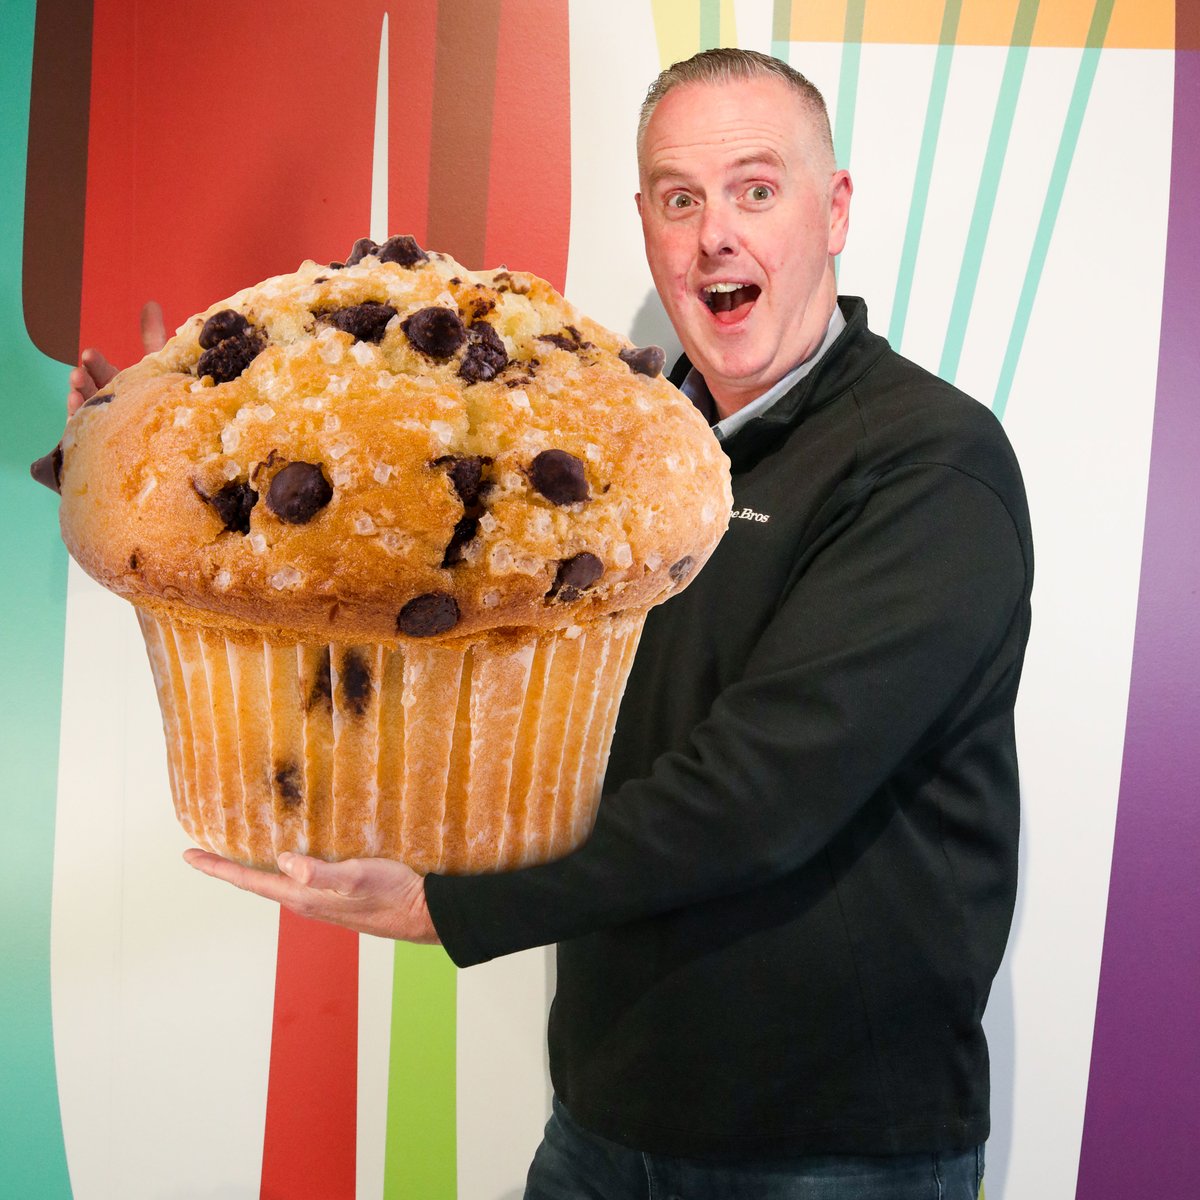 🚀 Brace yourselves for the ultimate indulgence: our latest creation, the JUMBO Muffin! 🌟 Weighing in at a whopping 30 pounds of sheer deliciousness, it's a flavor-packed adventure you won't want to miss! 🤤 #AprilFools